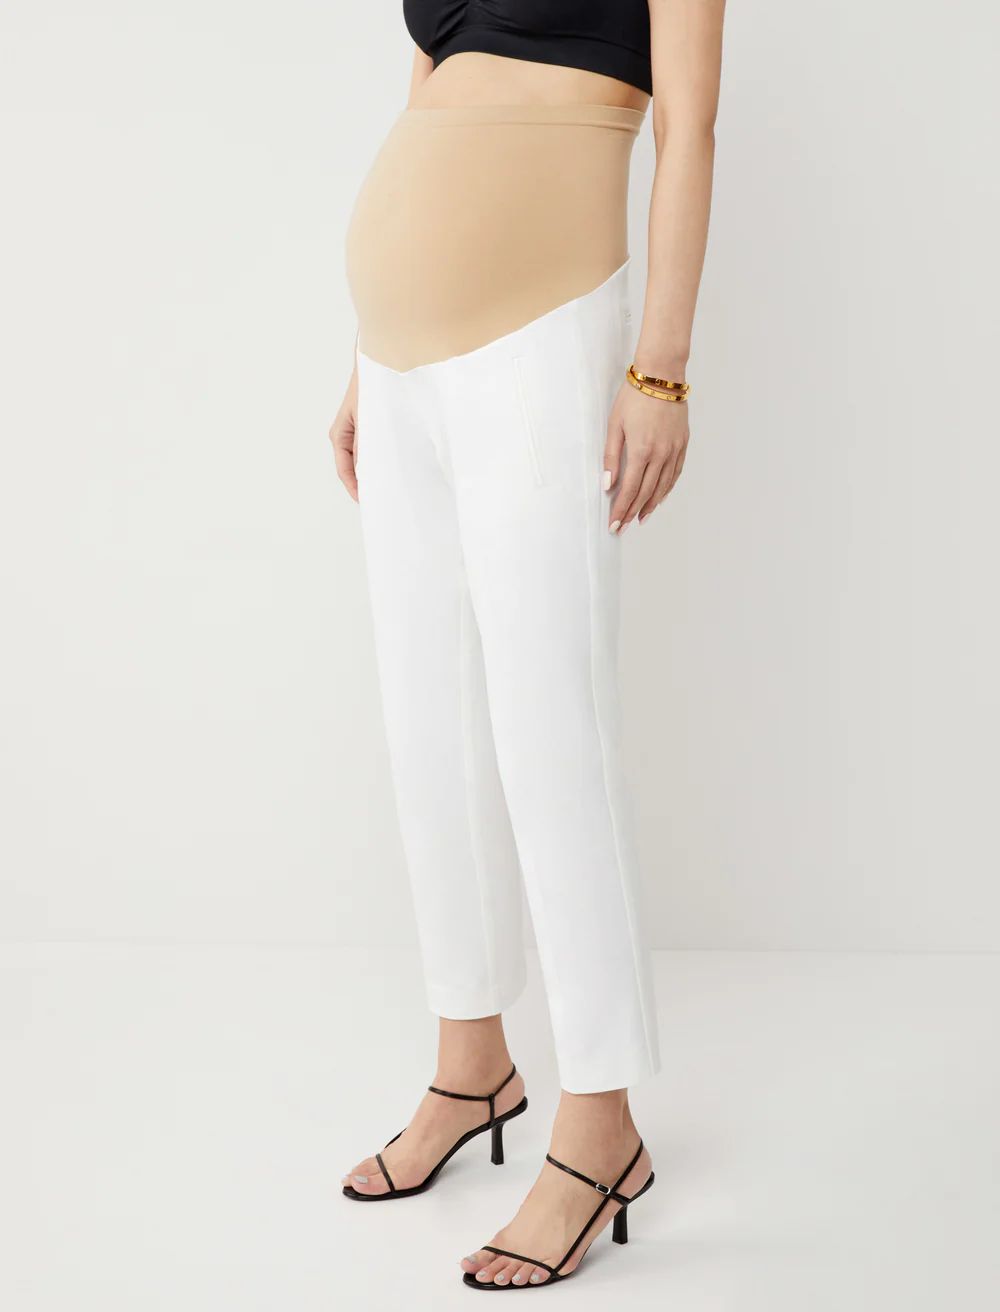 The Curie Secret Fit Belly Twill Slim Ankle Maternity Pant | Motherhood Maternity